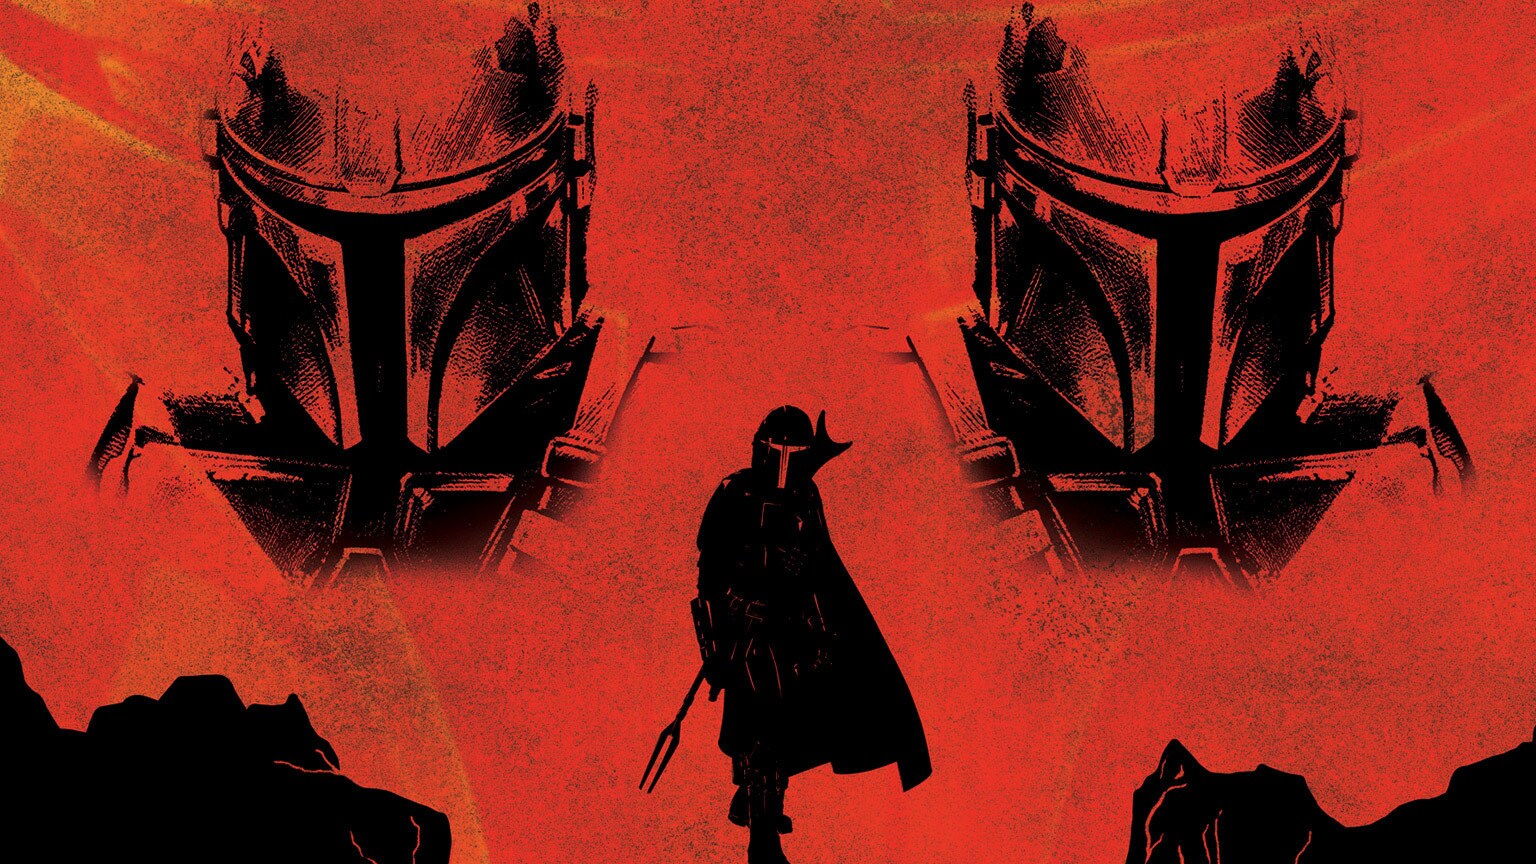 For Heroes & Villains, Western Art Meets The Mandalorian -- Exclusive